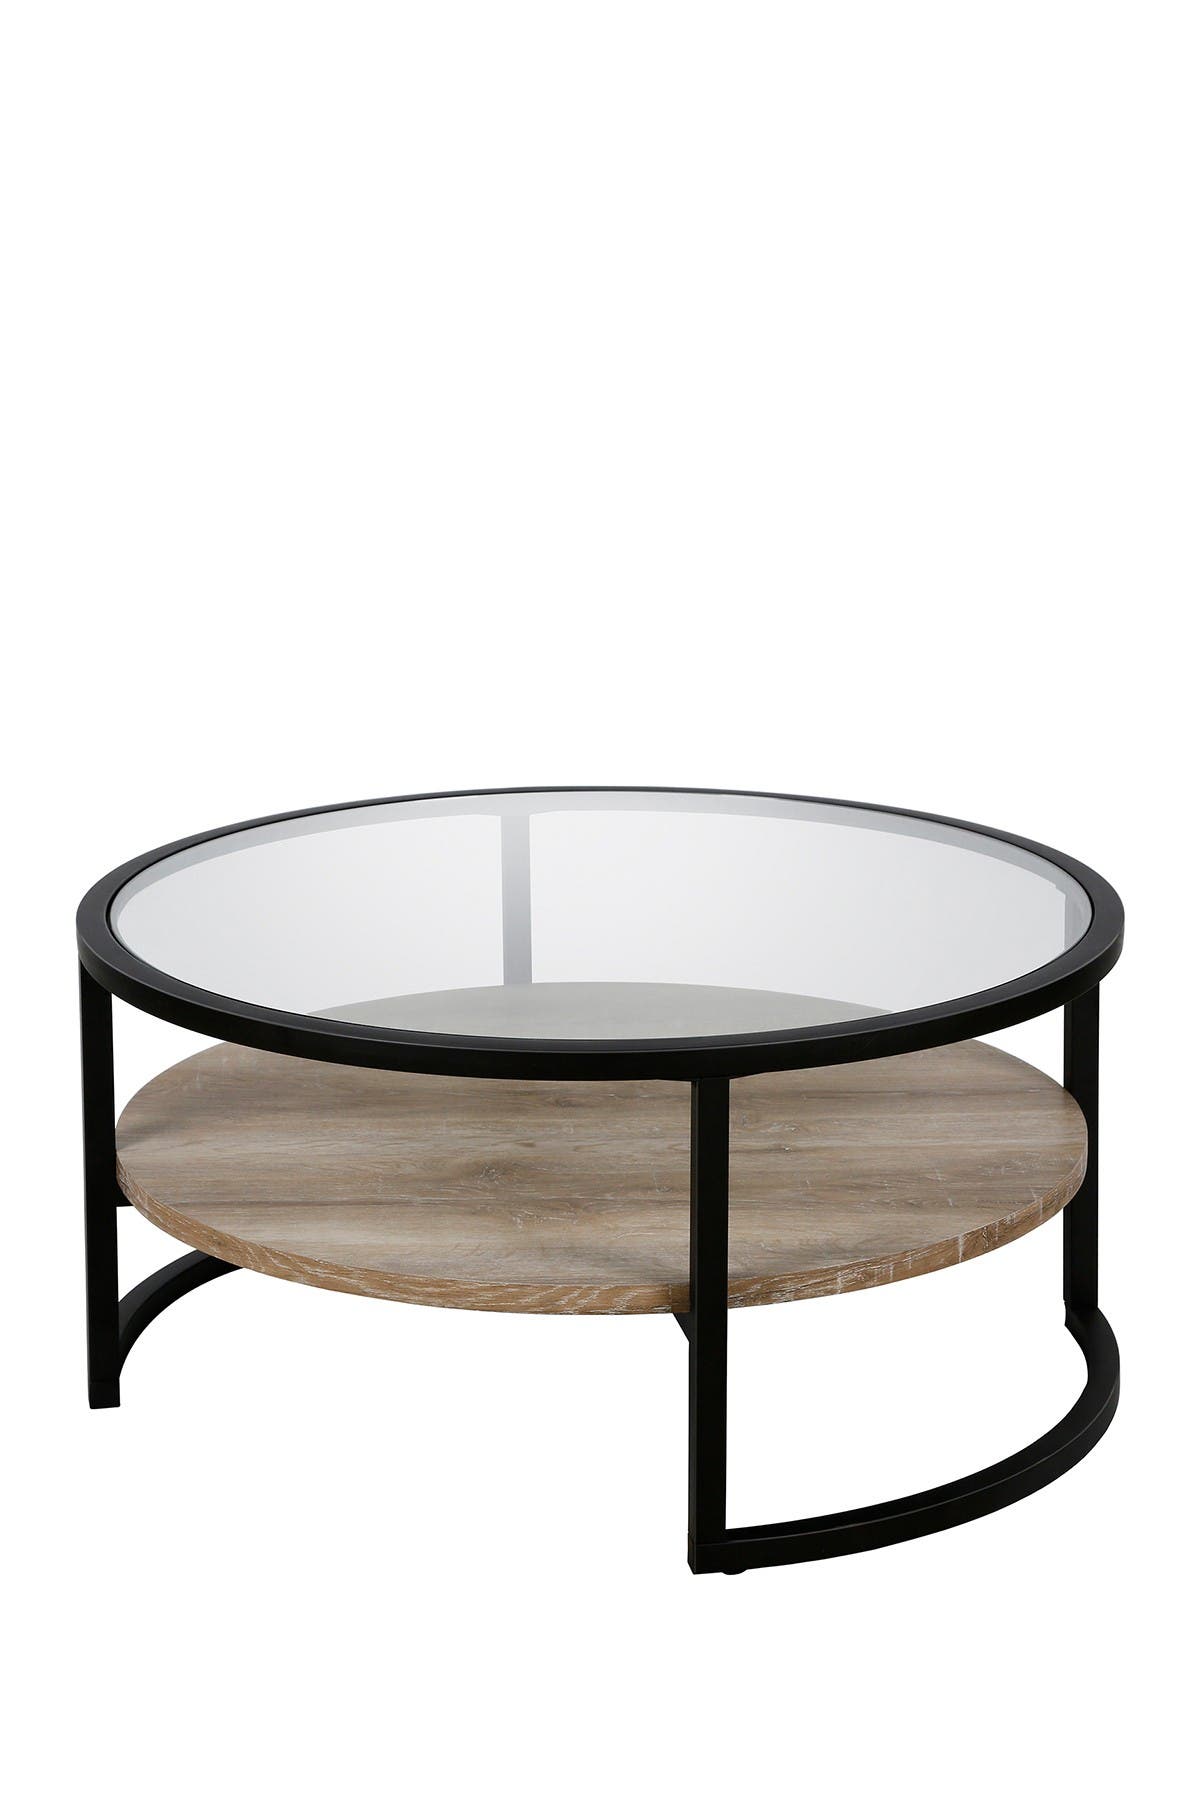 Addison And Lane Winston Blackened Bronze And Limed Oak Round Coffee Table